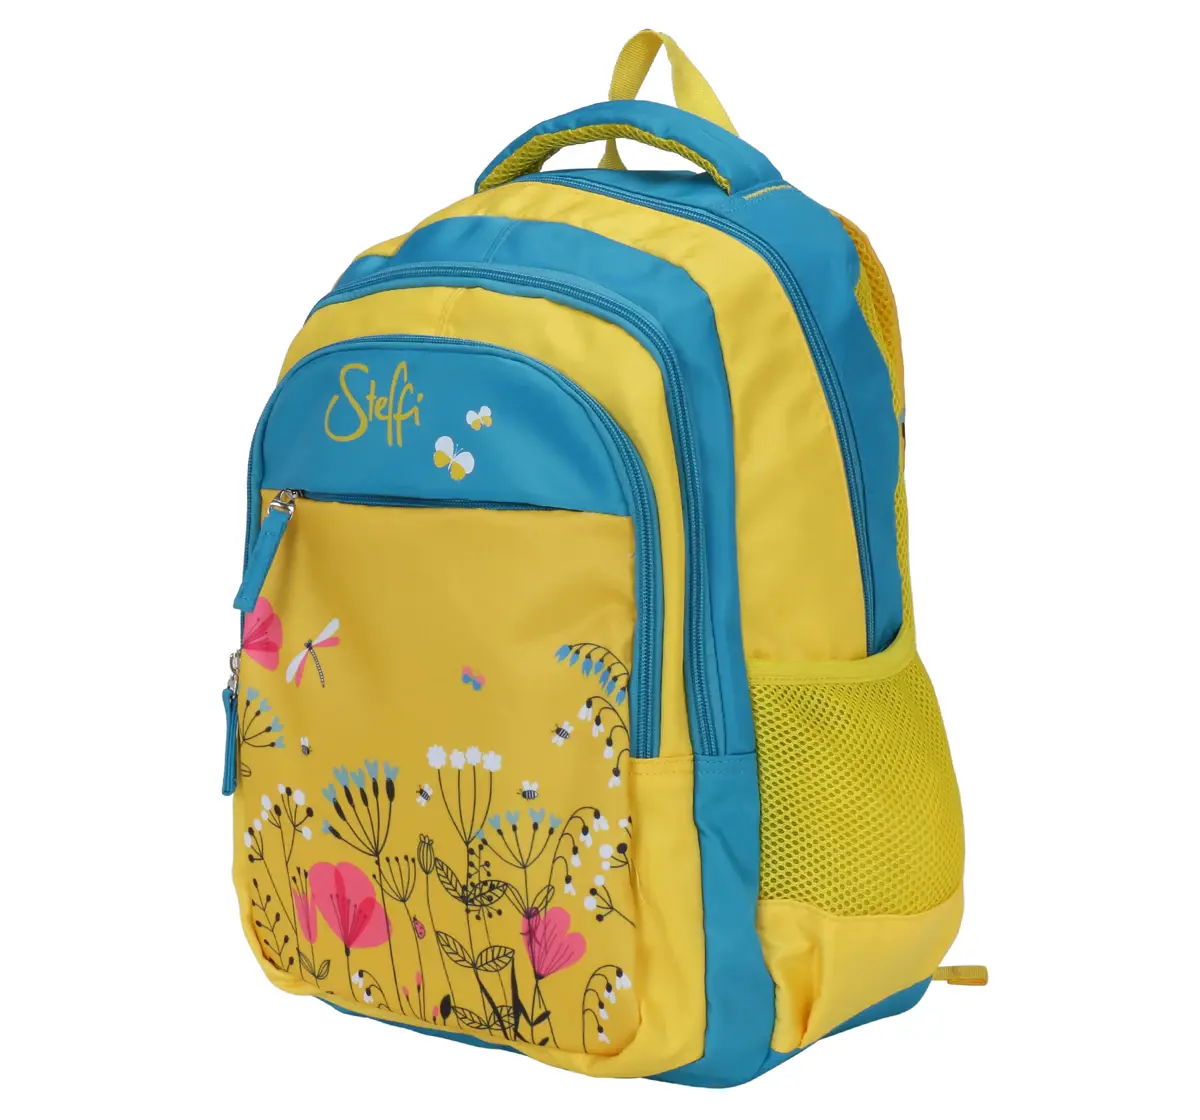 Simba Steffi Love Cherry Blossom 19 Backpack Multicolor 3Y+